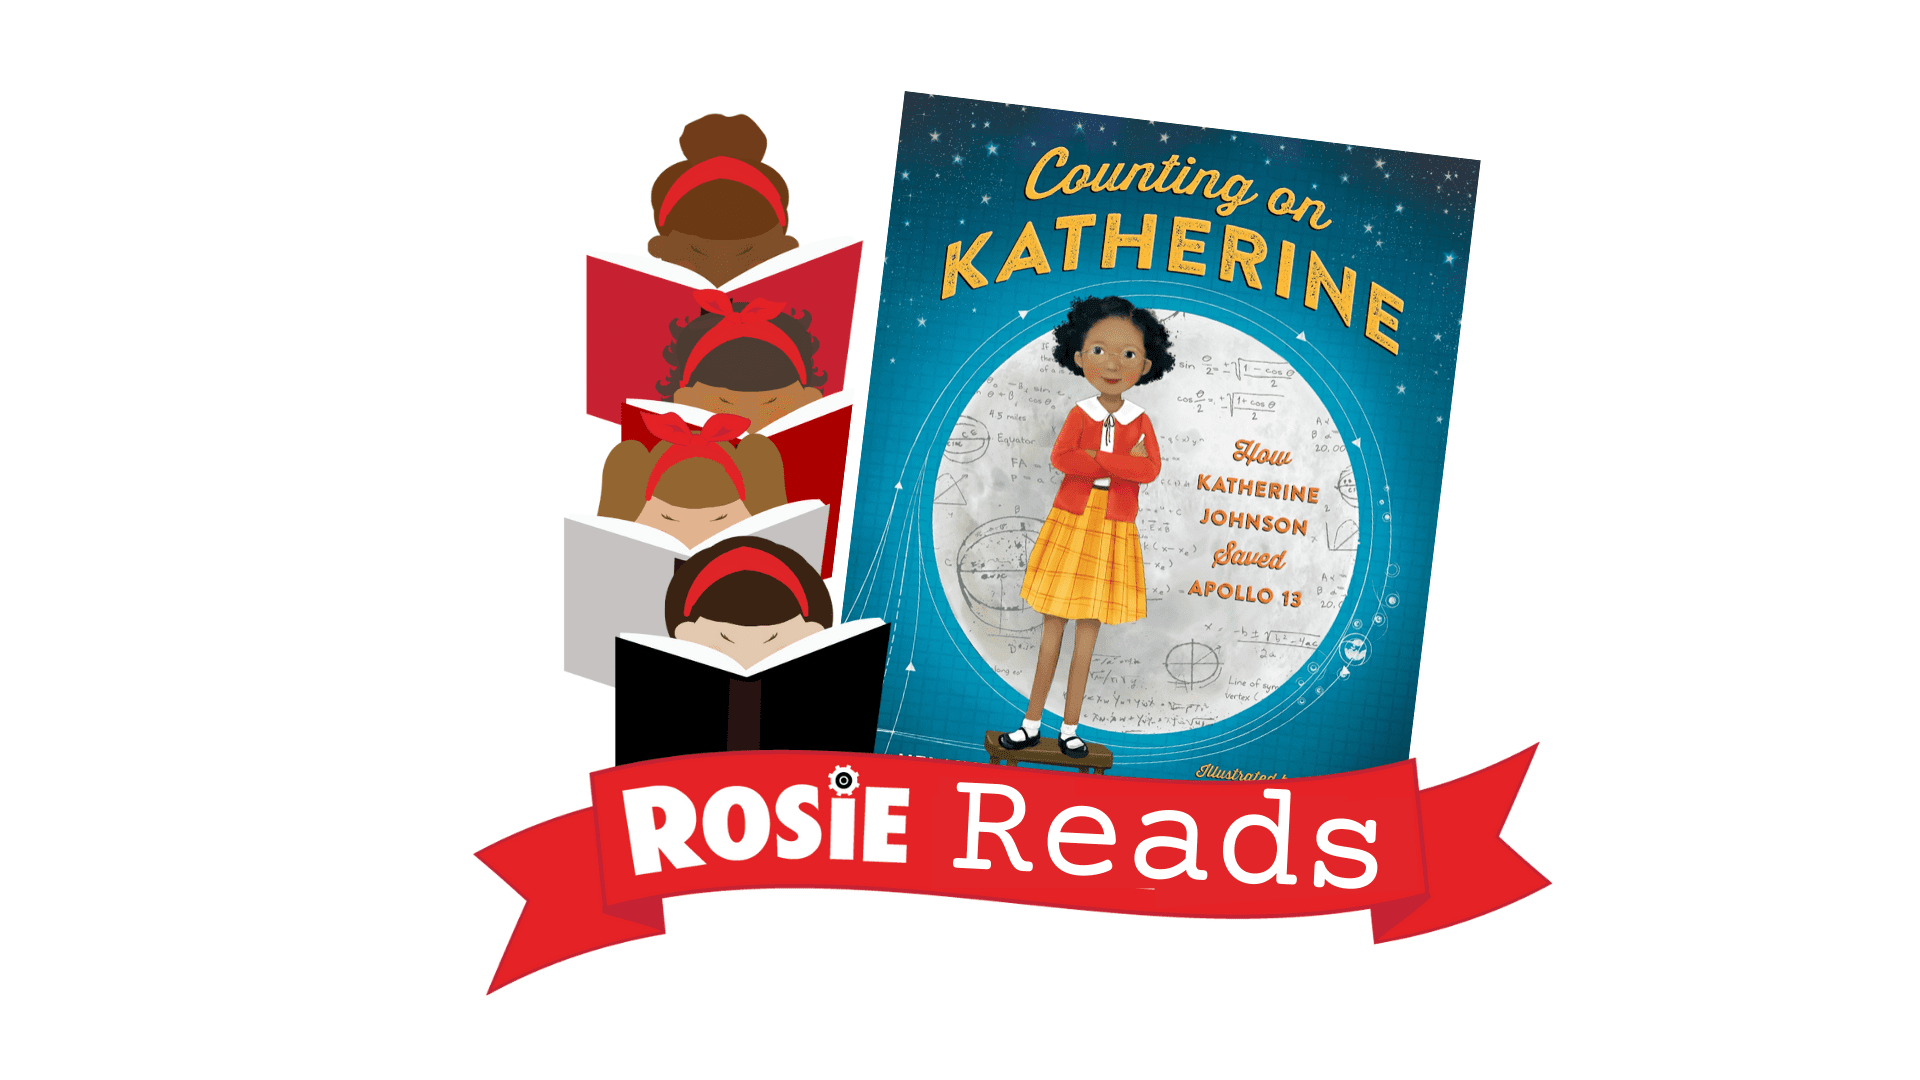 Counting on Katherine book cover and Rosie Riveters logo